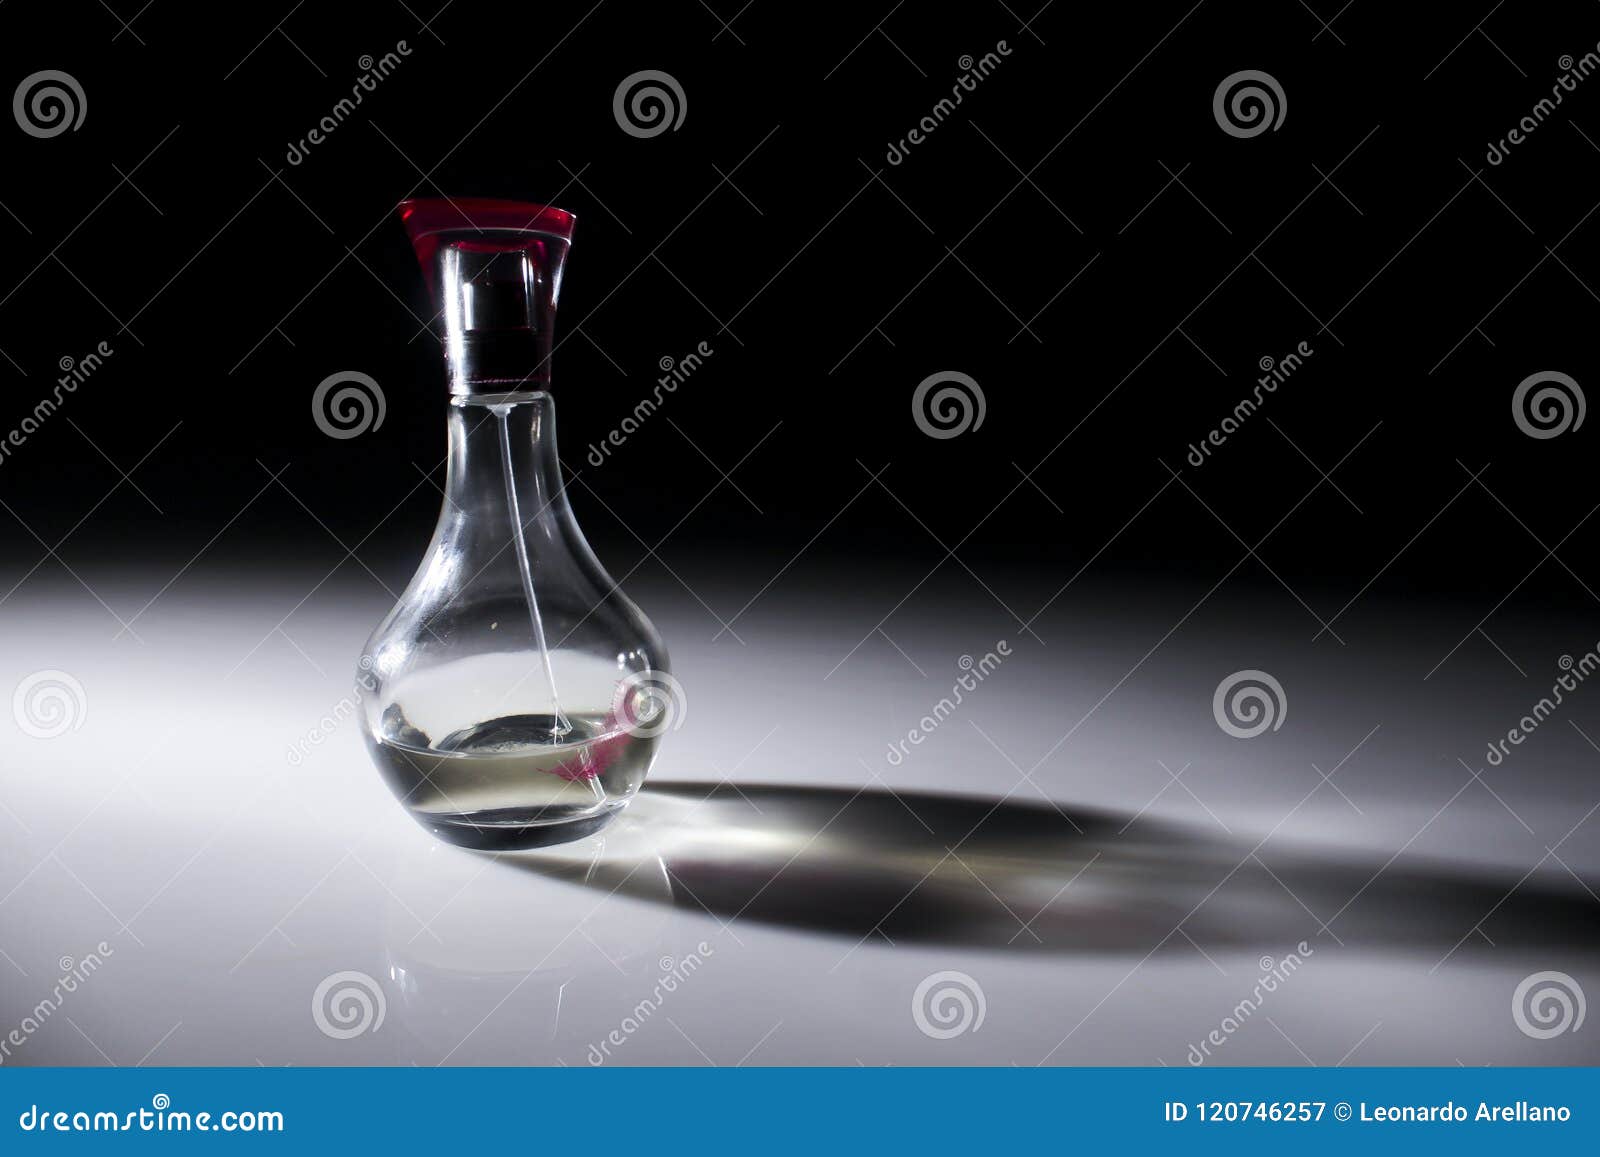 transparent perfume bottle with pink lid